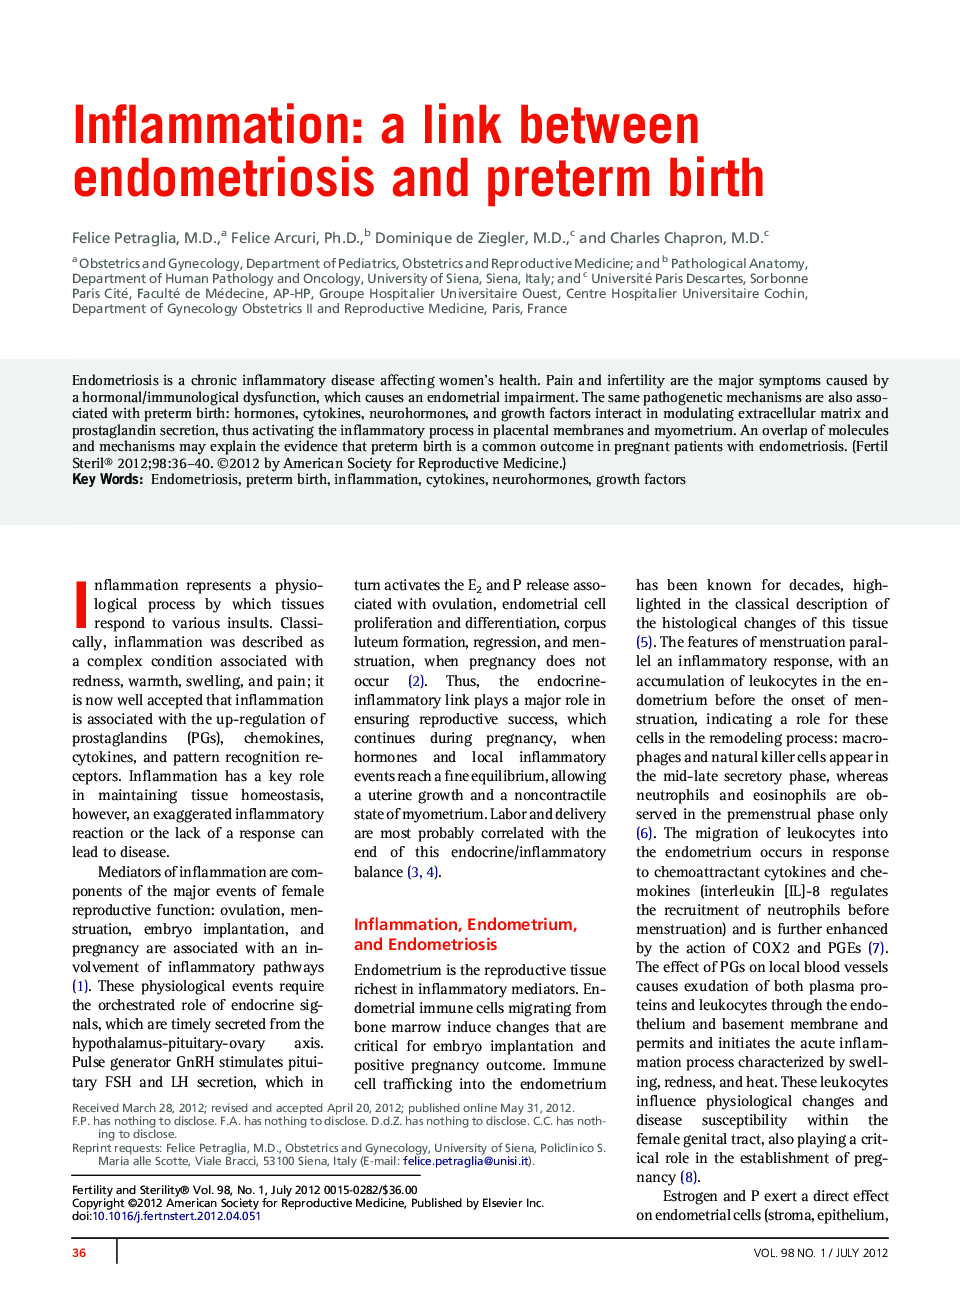 Inflammation: a link between endometriosis and preterm birth 